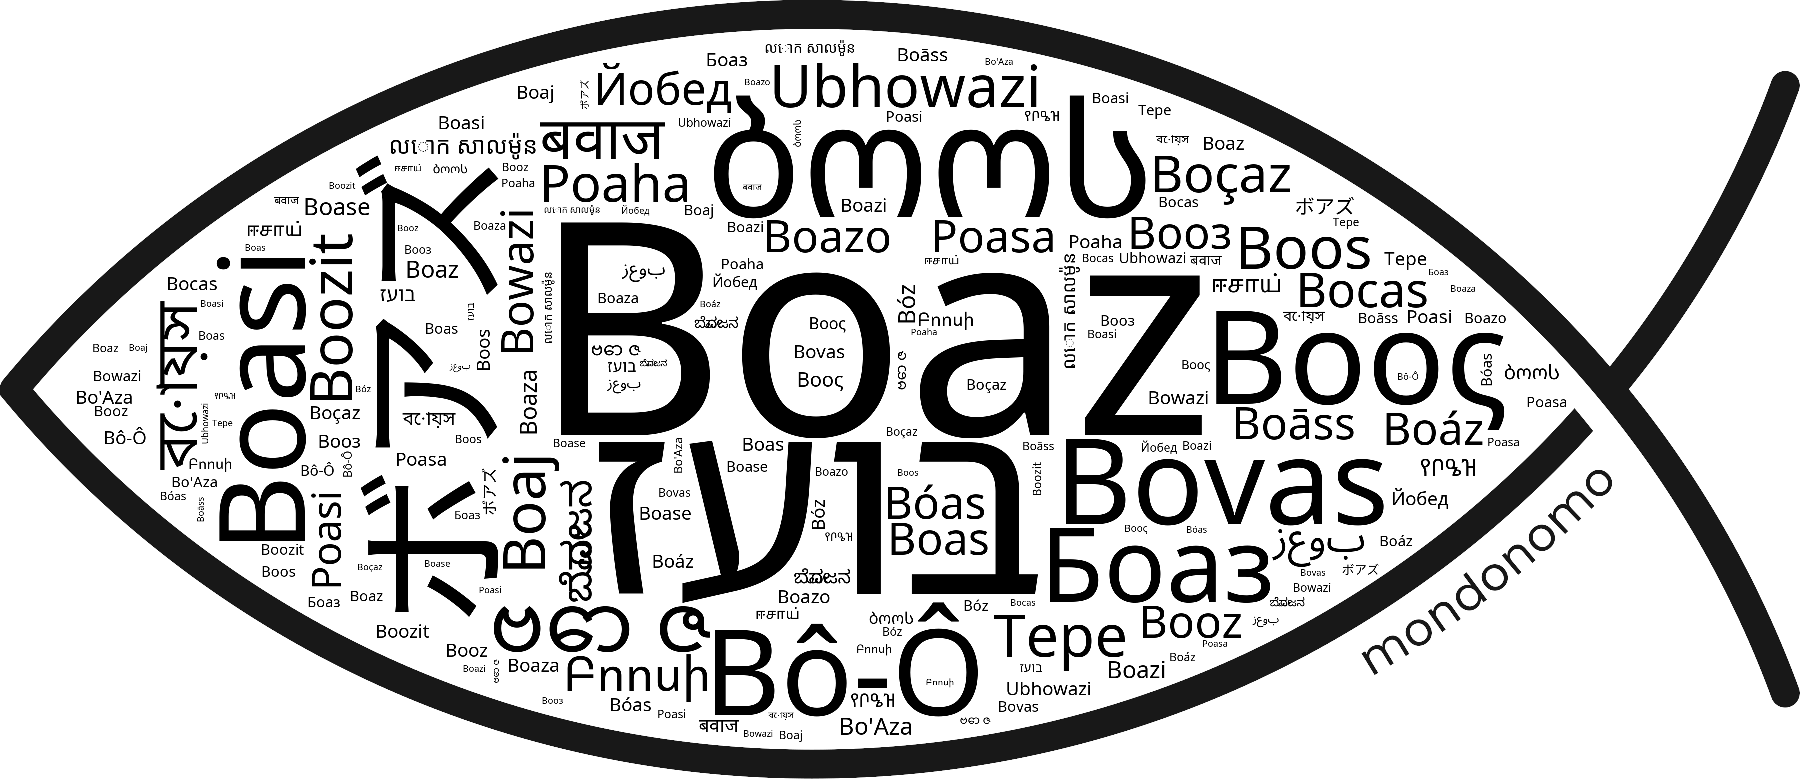 Name Boaz in the world's Bibles